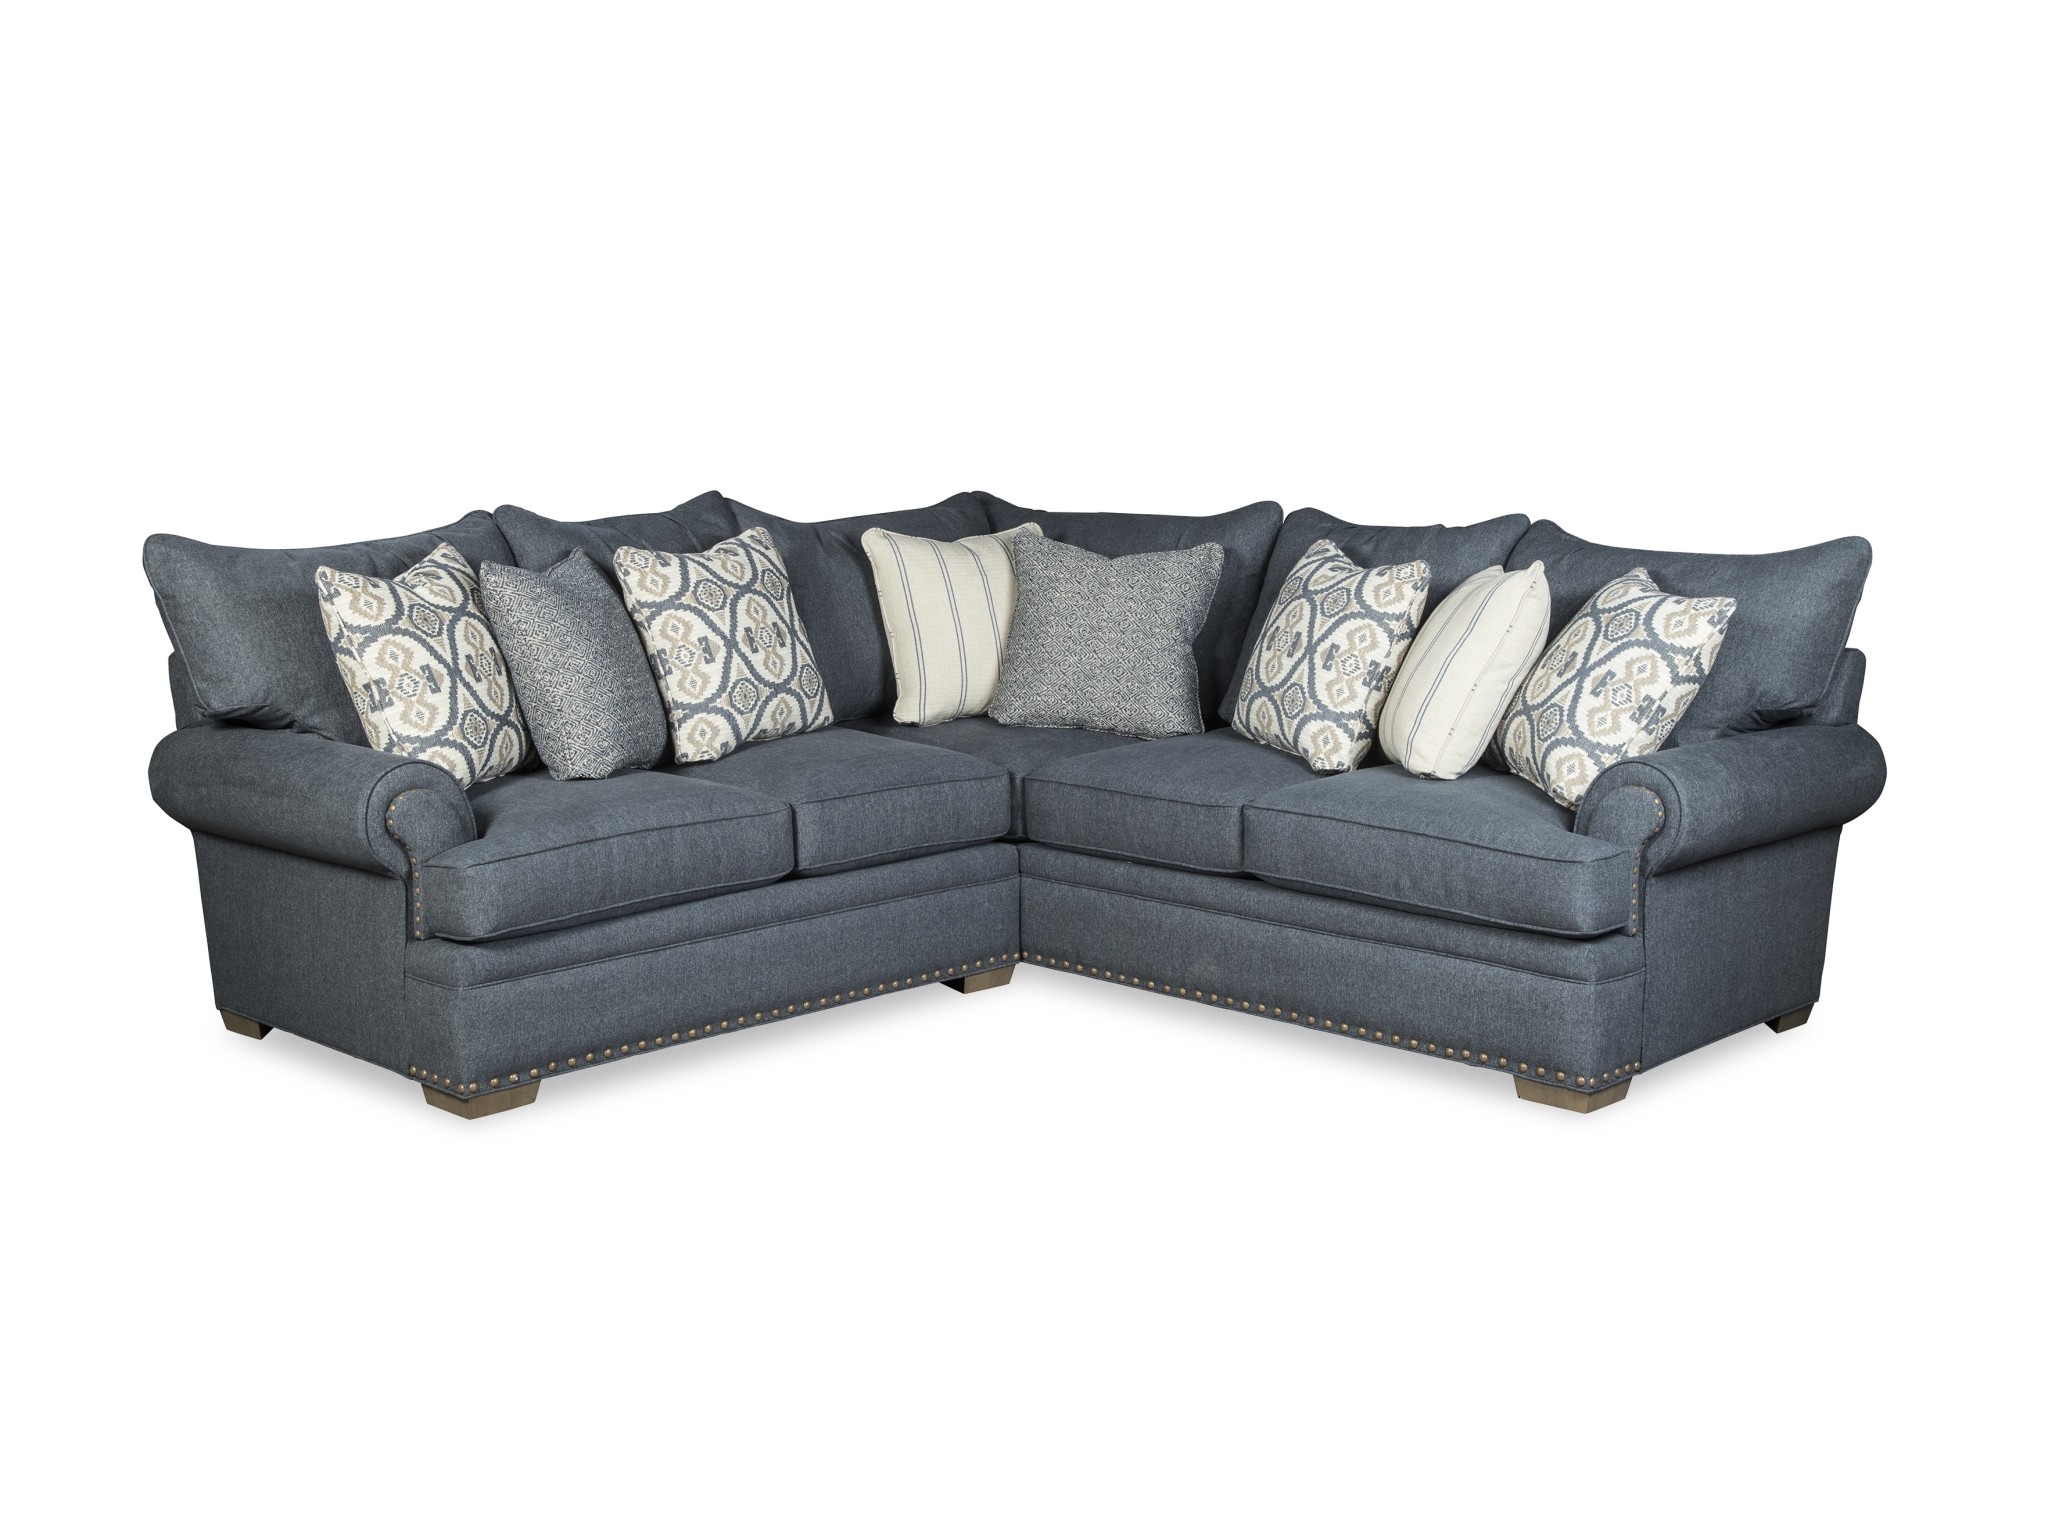 Craftmaster Furniture 7016 Sectional